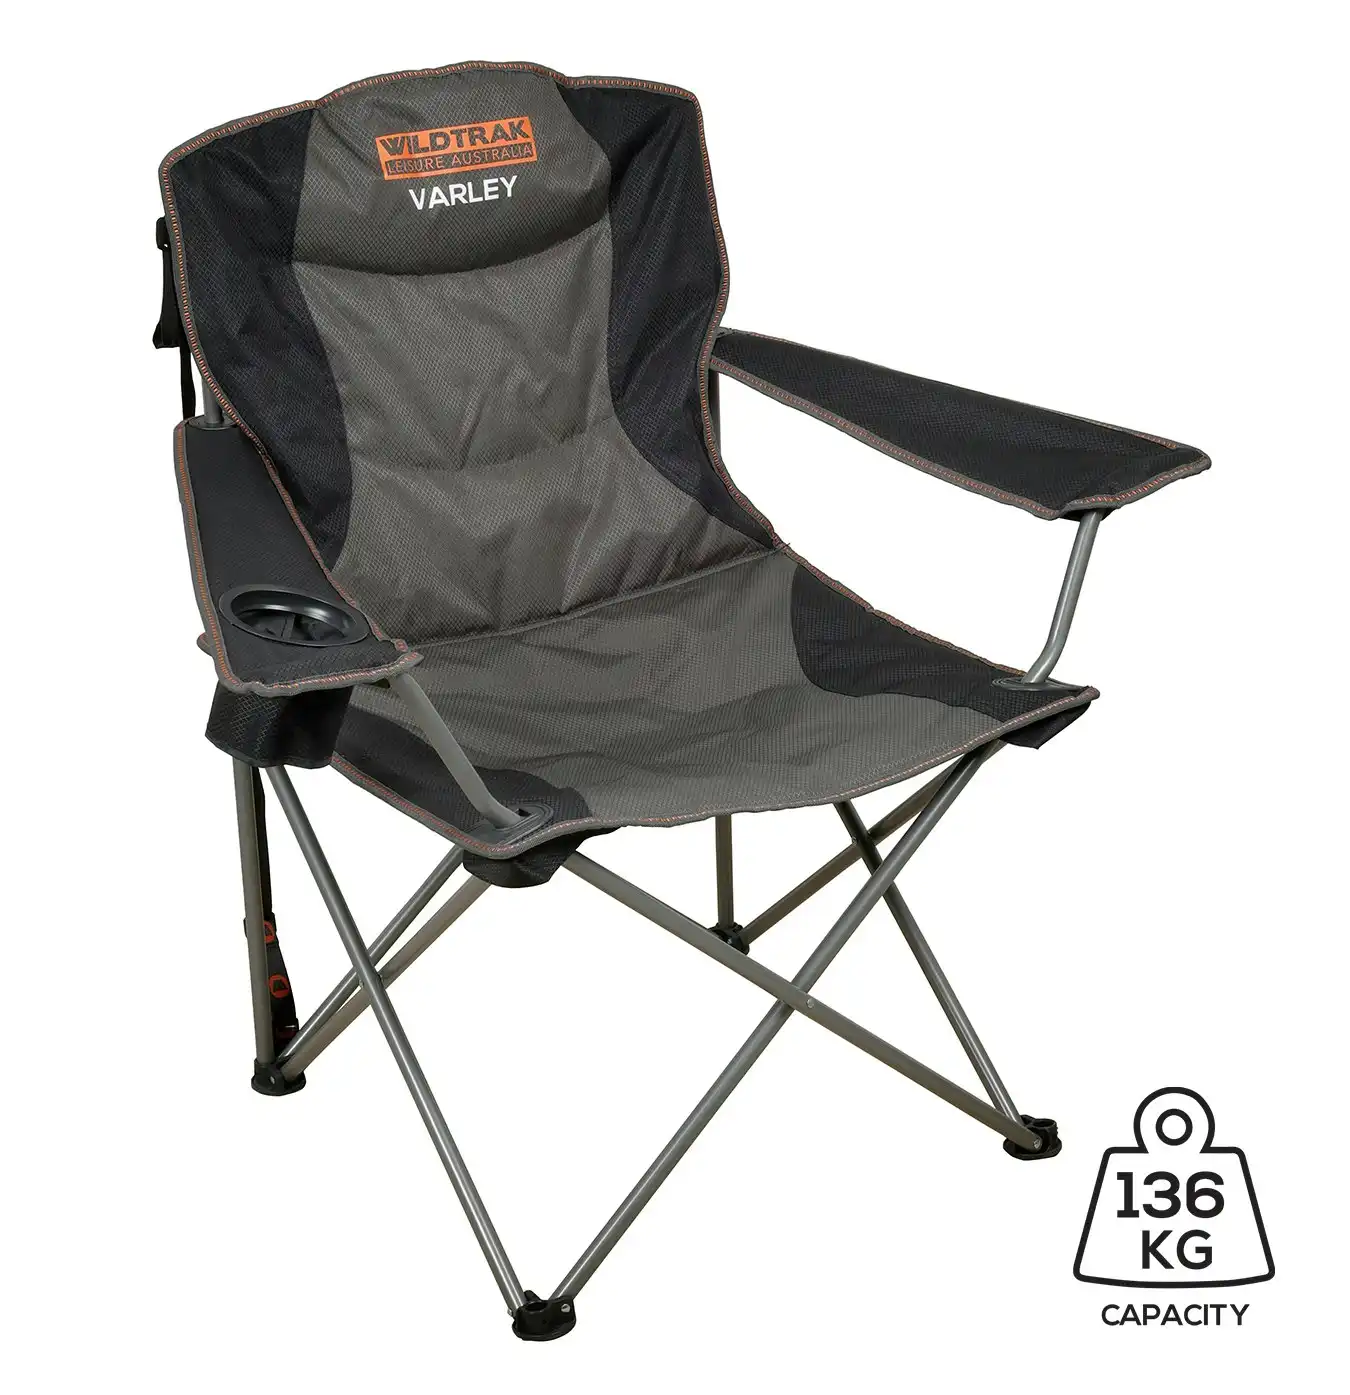 Wildtrak Varley 100cm Camp Chair Foldable Camping Seat w/ Cup Holder Grey/Black